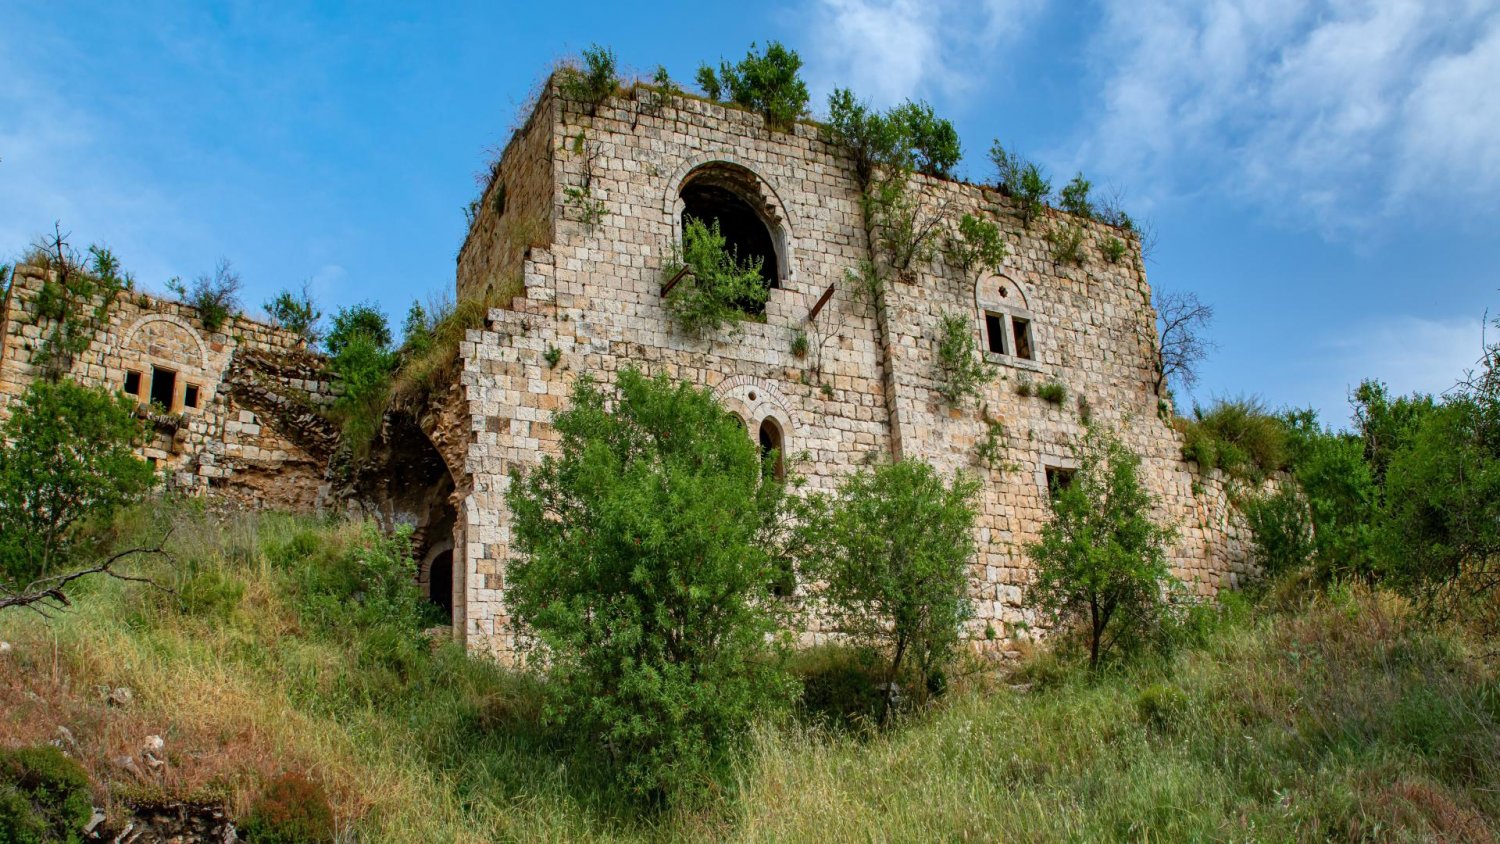 The structures of the Palestinian village of Lifta are not maintained, but remain standing despite its depopulation in 1948